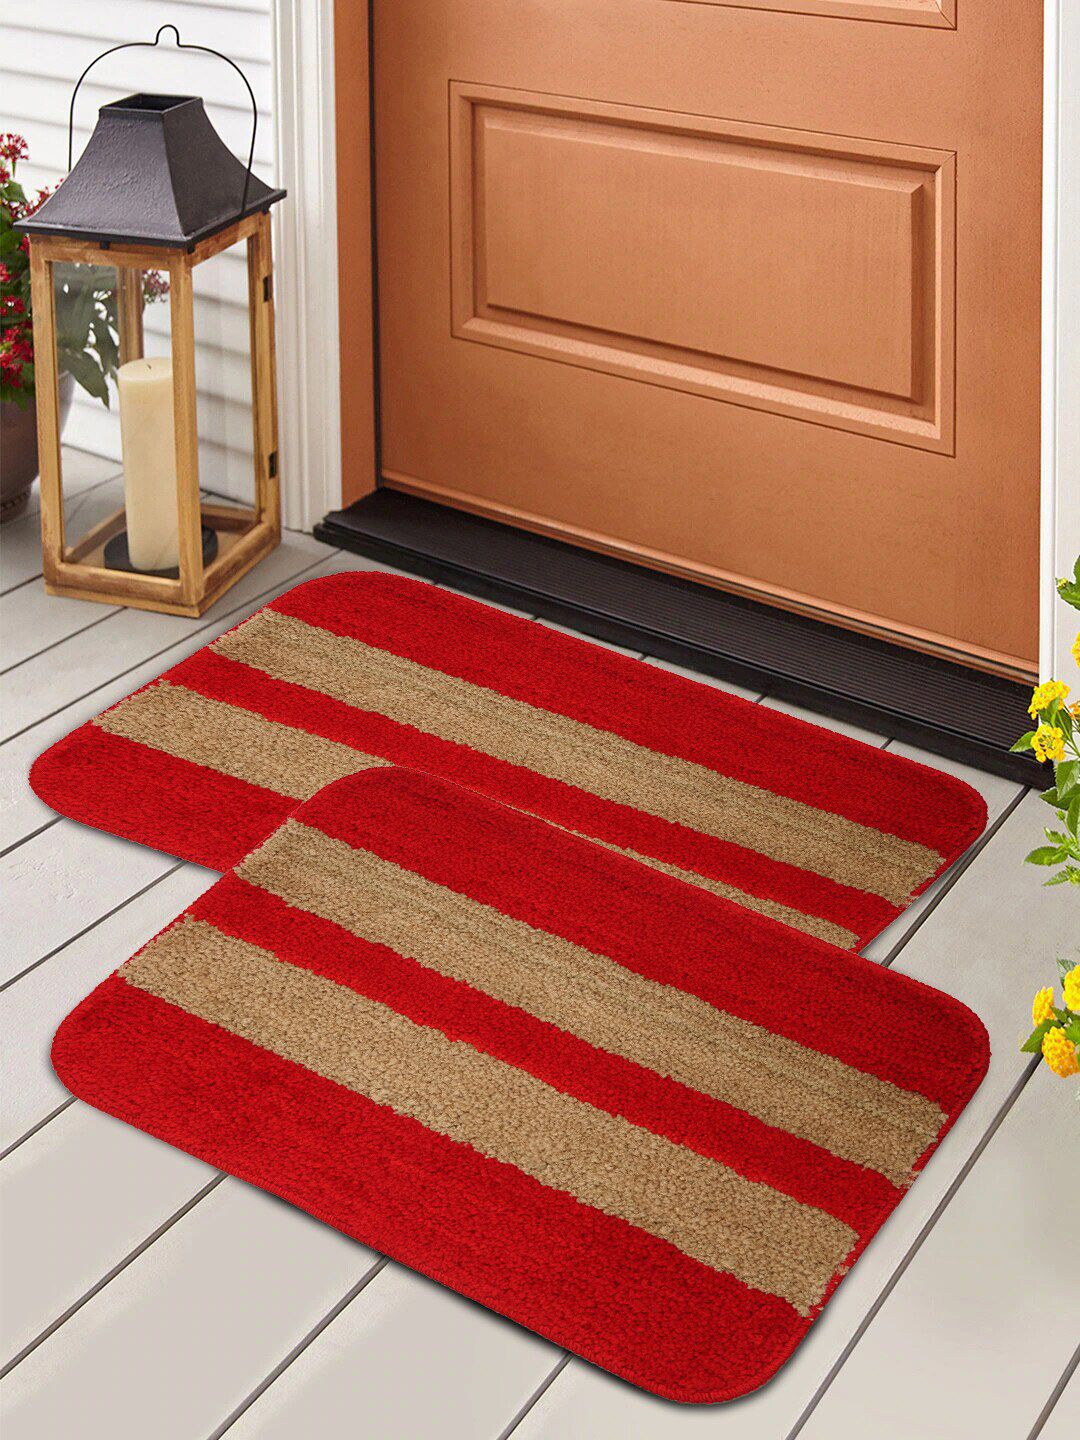 HOSTA HOMES Set Of 2 Red & Tan-Brown Striped Anti-Skid Doormats Price in India